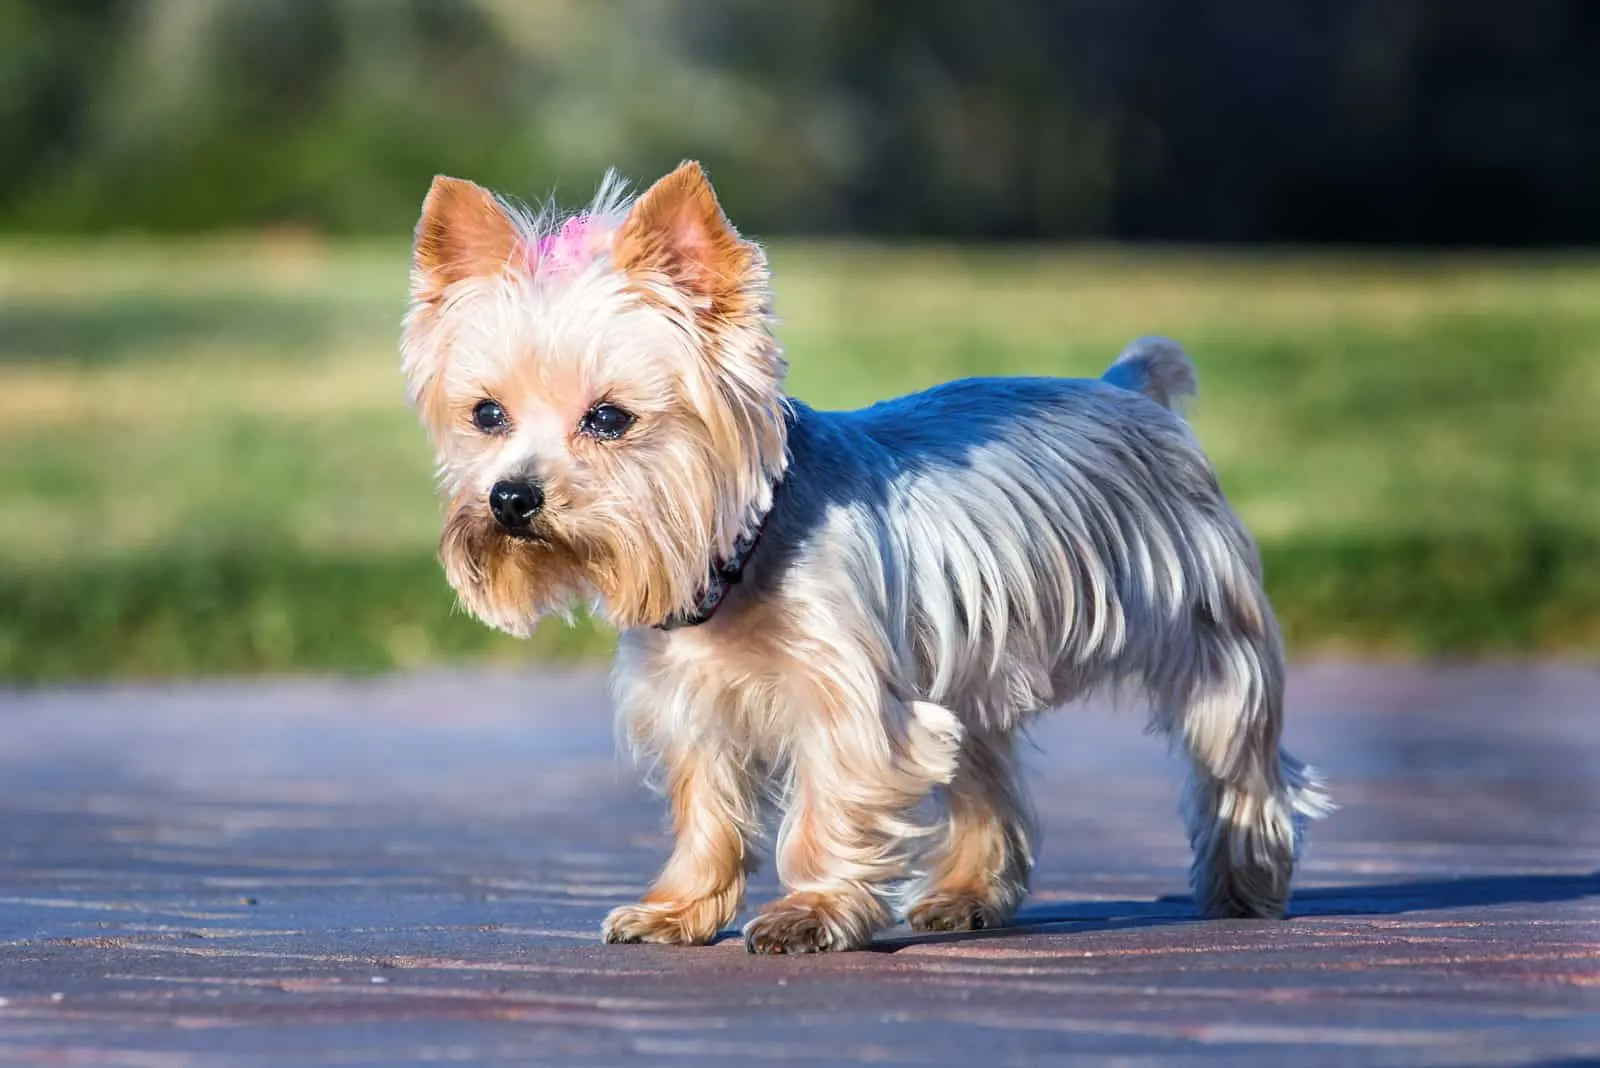 Yorkie dog standing outdoors in sun